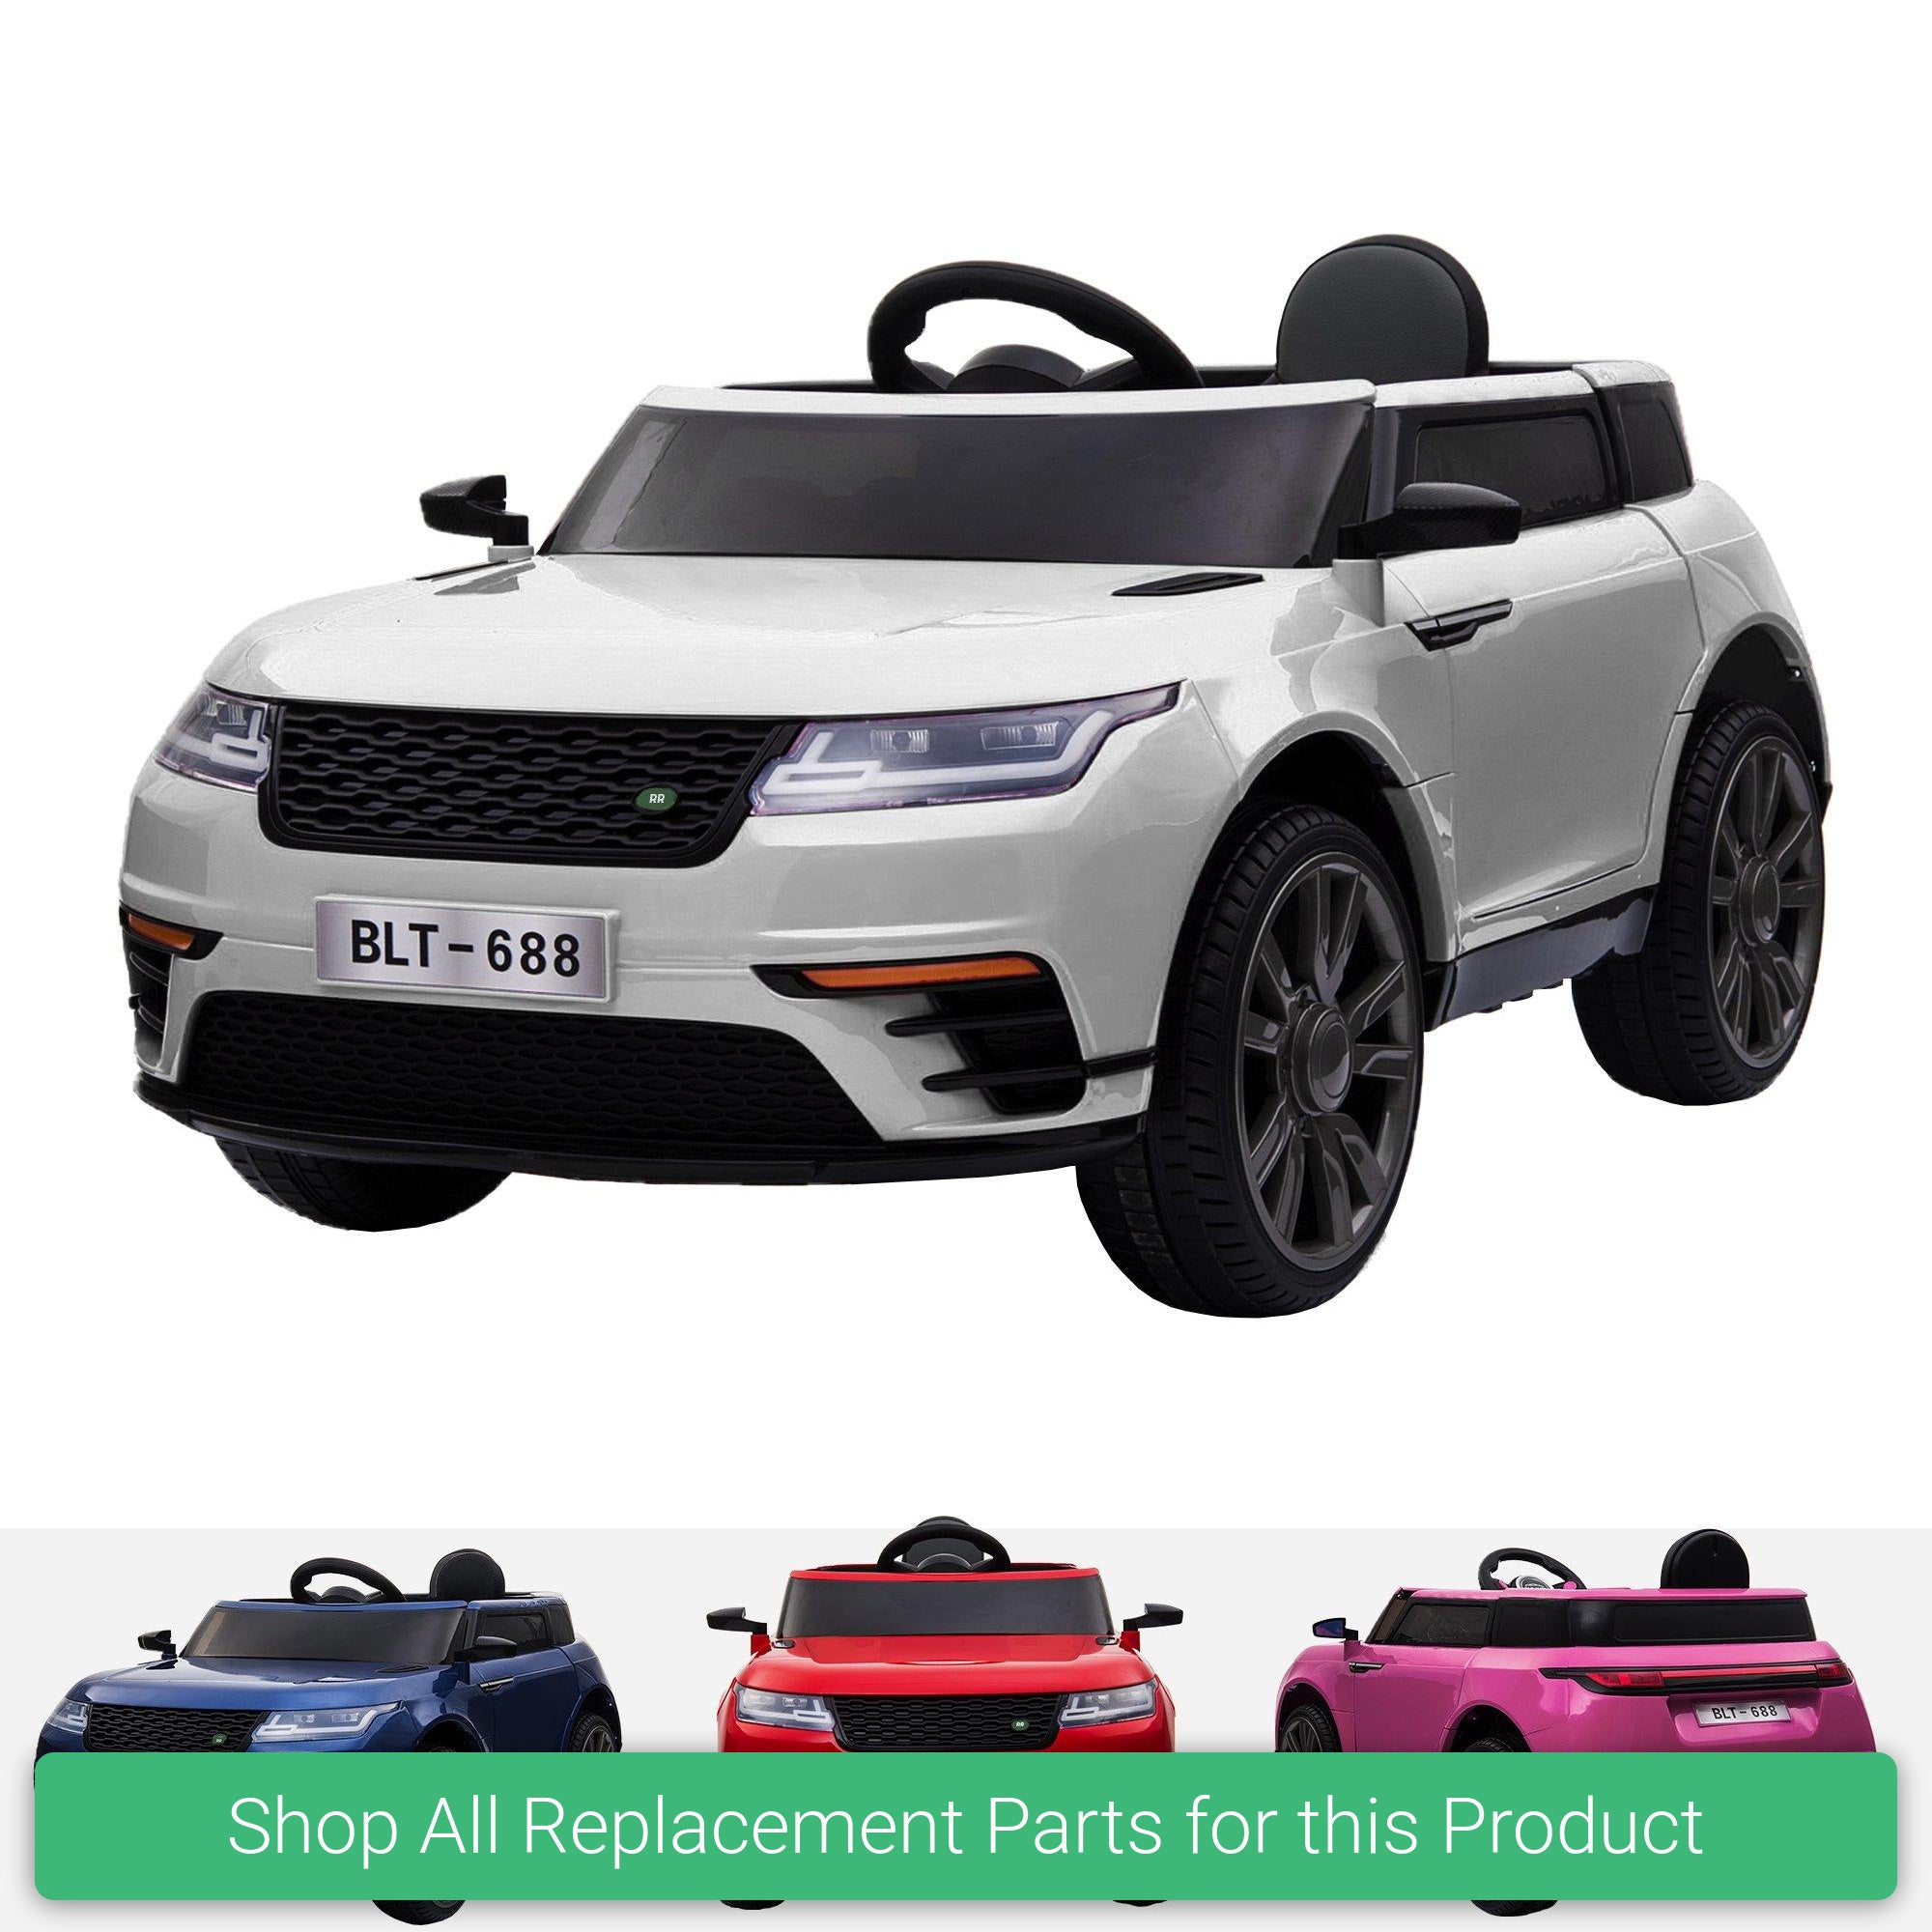 Replacement Parts and Spares for Kids Range Rover Velar Style - R4G-VEL-VARI - BLT-688